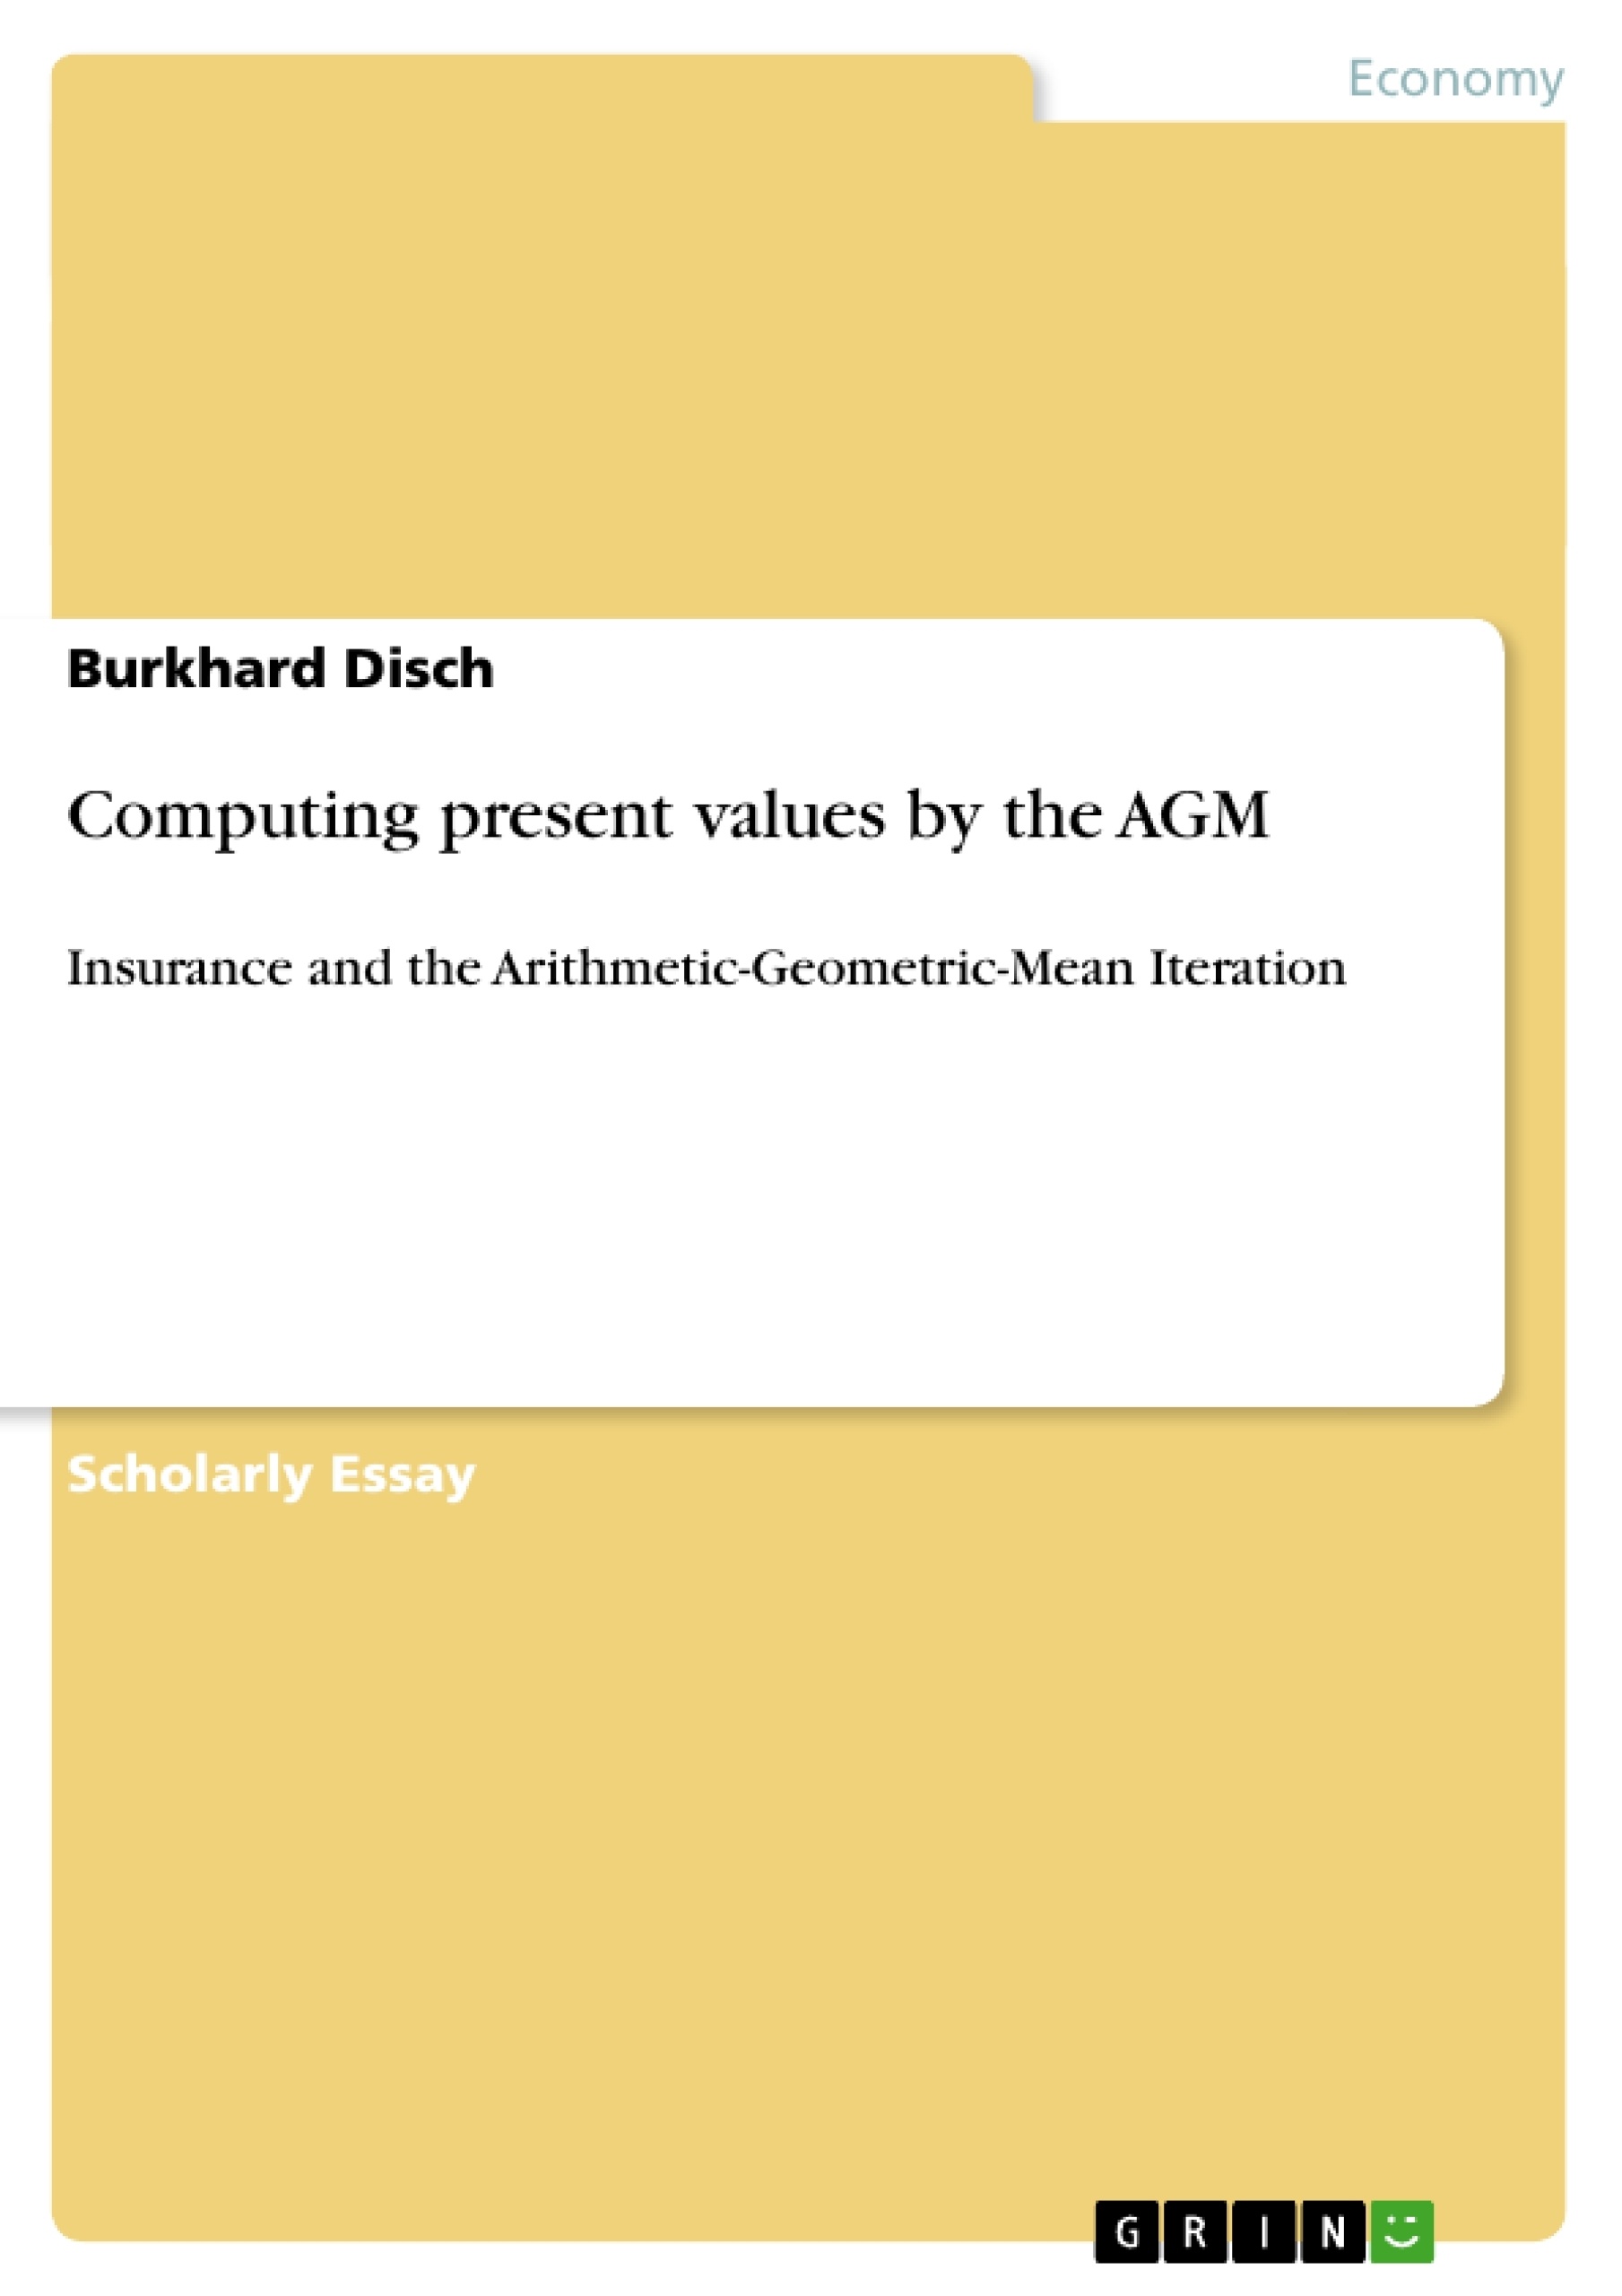 Title: Computing present values by the AGM